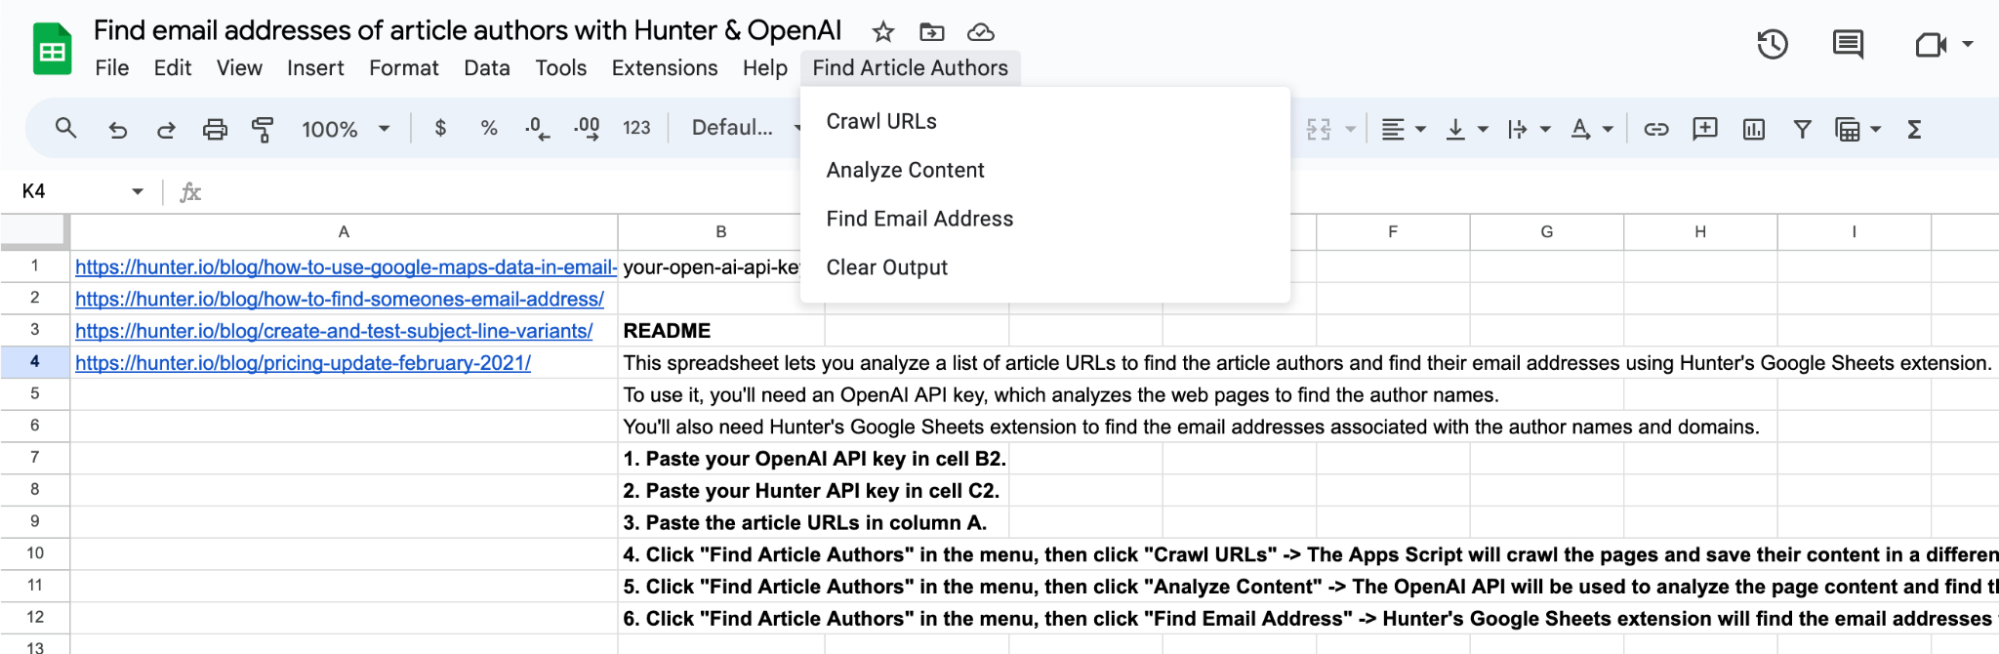 The Google Sheets file that's configured to help you find email addresses of article authors